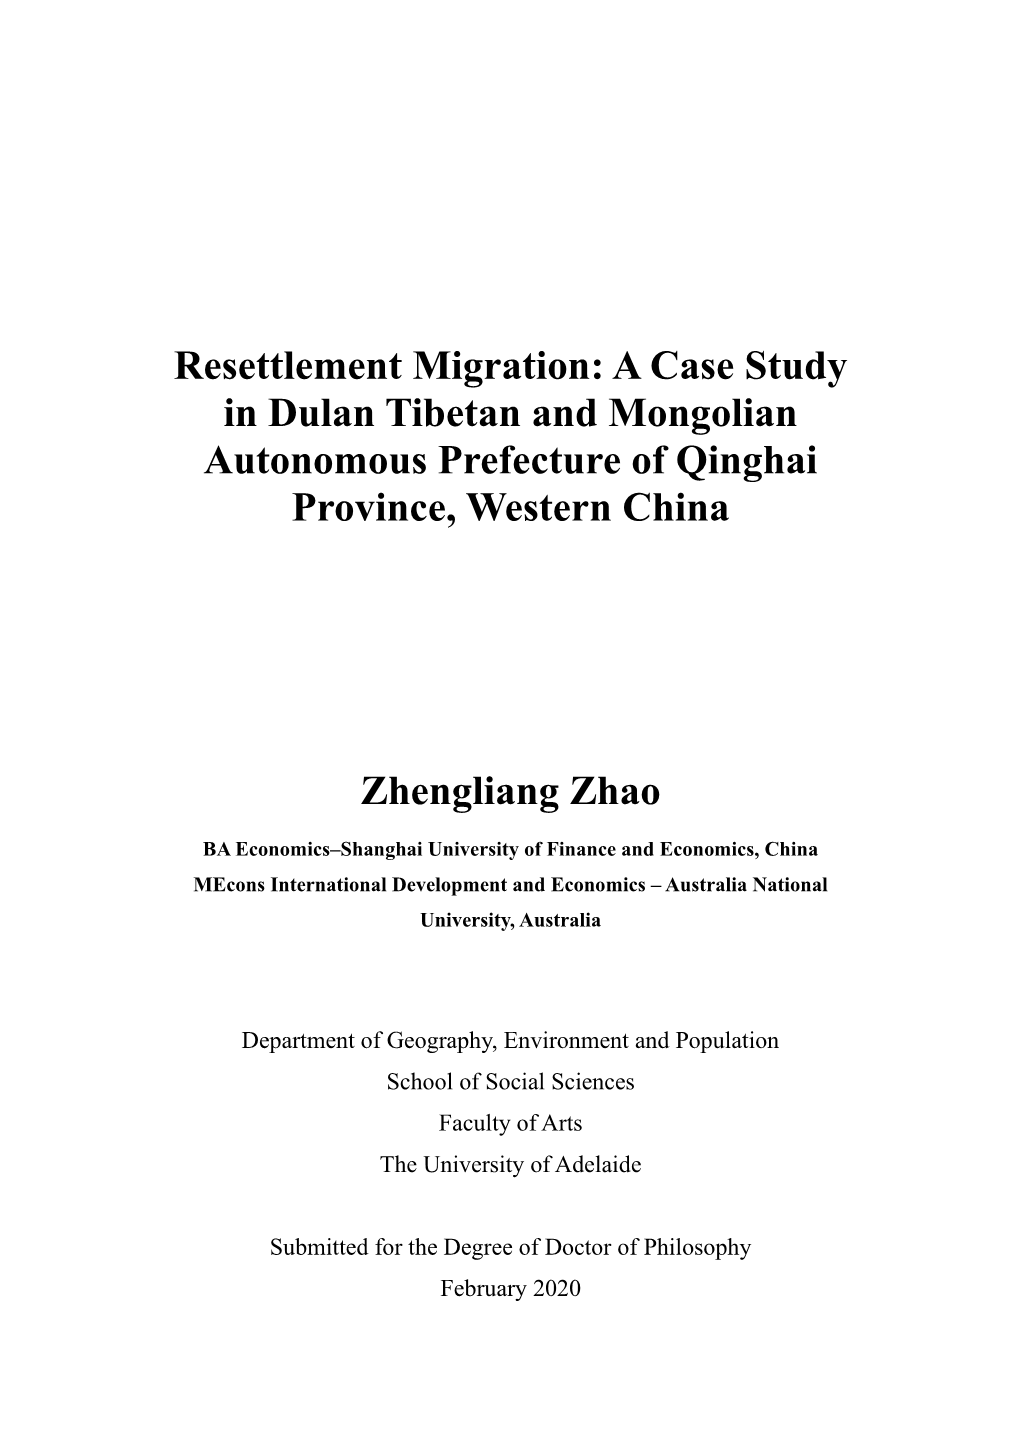 Resettlement Migration: a Case Study in Dulan Tibetan and Mongolian Autonomous Prefecture of Qinghai Province, Western China